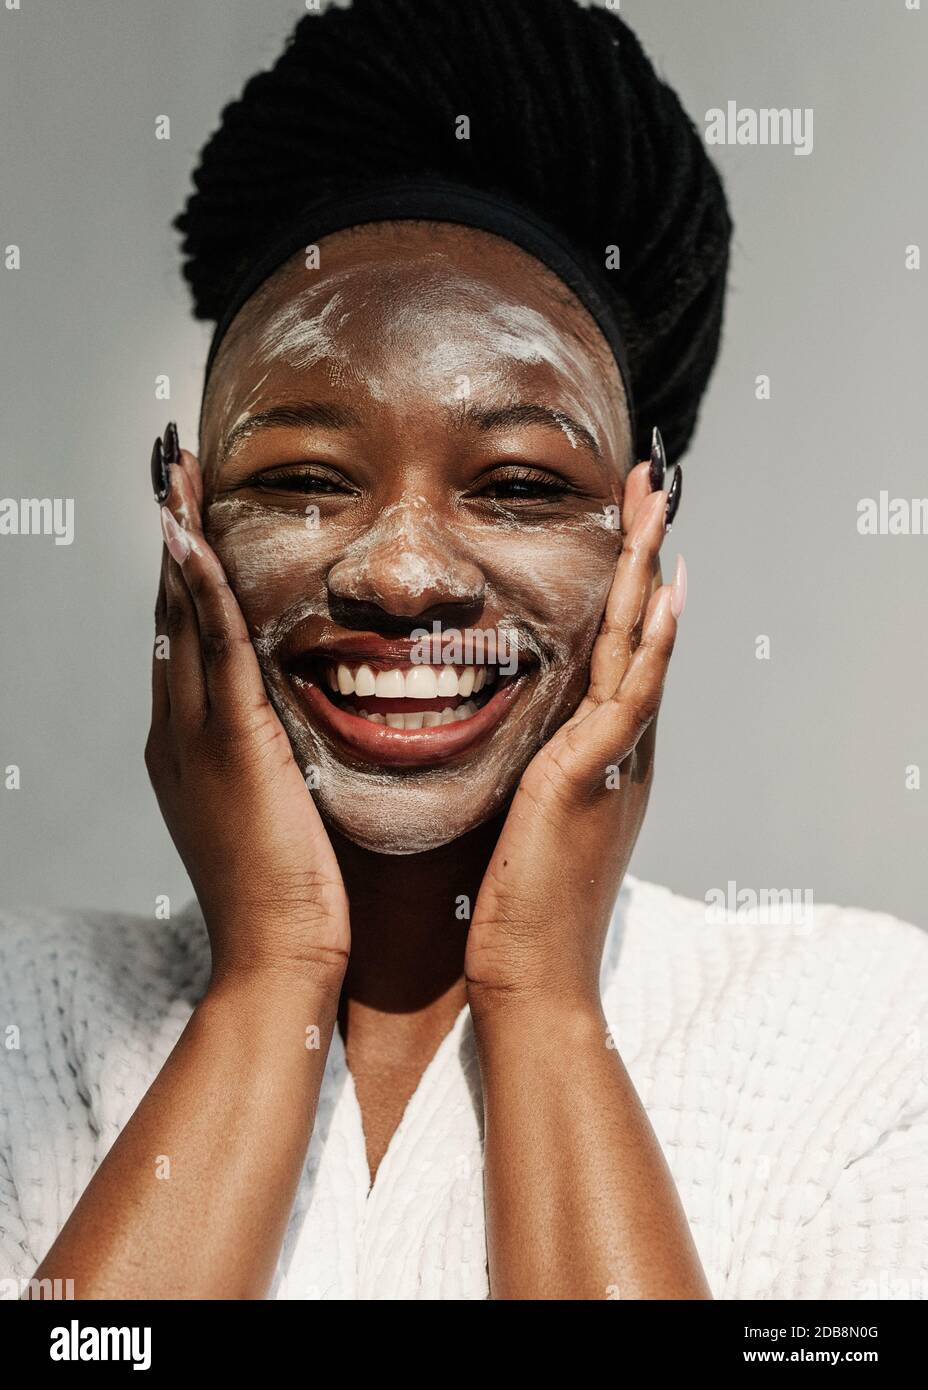 Portrait of a smiling woman with a face mask Stock Photo